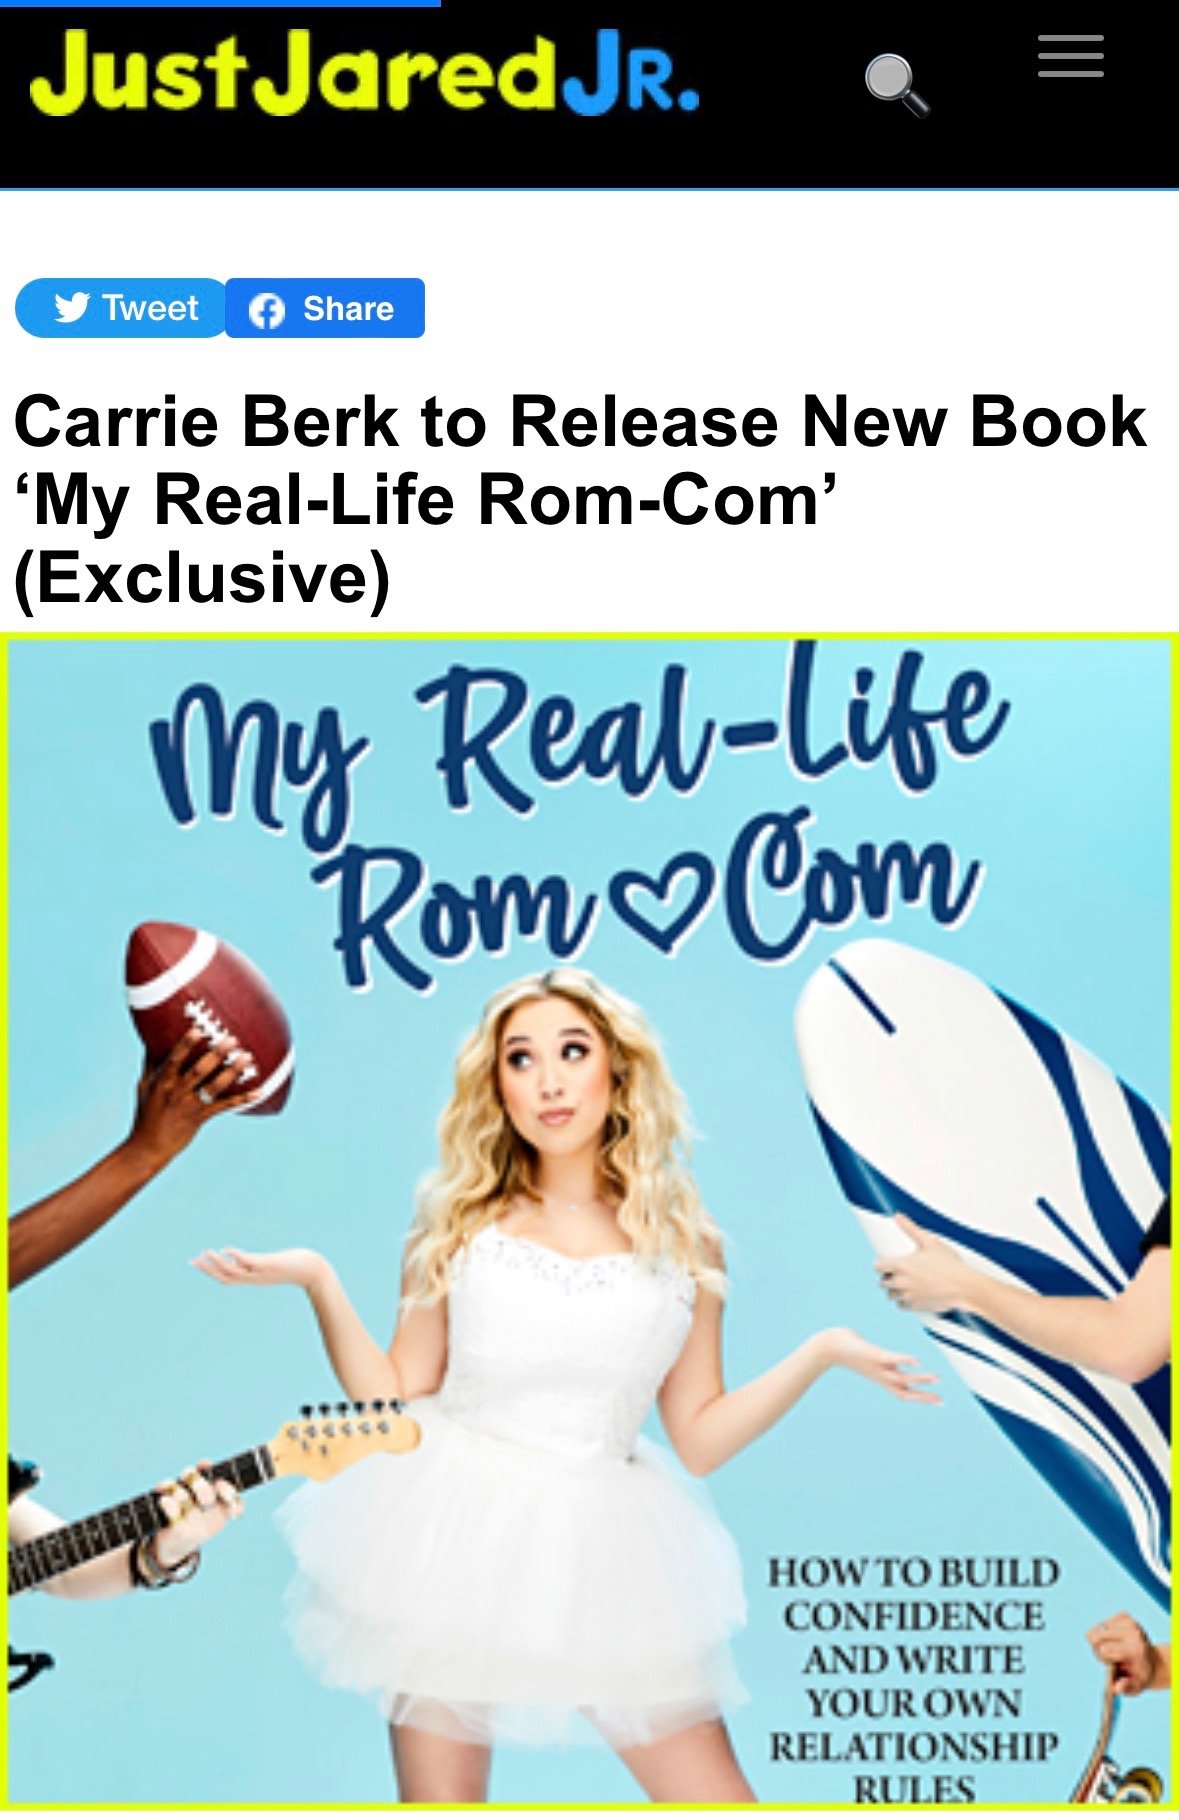 Carrie Berk to Release New Book ‘My Real-Life Rom-Com’ (Exclusive)  books, Carrie Berk, Exclusive  Just Jared Jr.jpeg